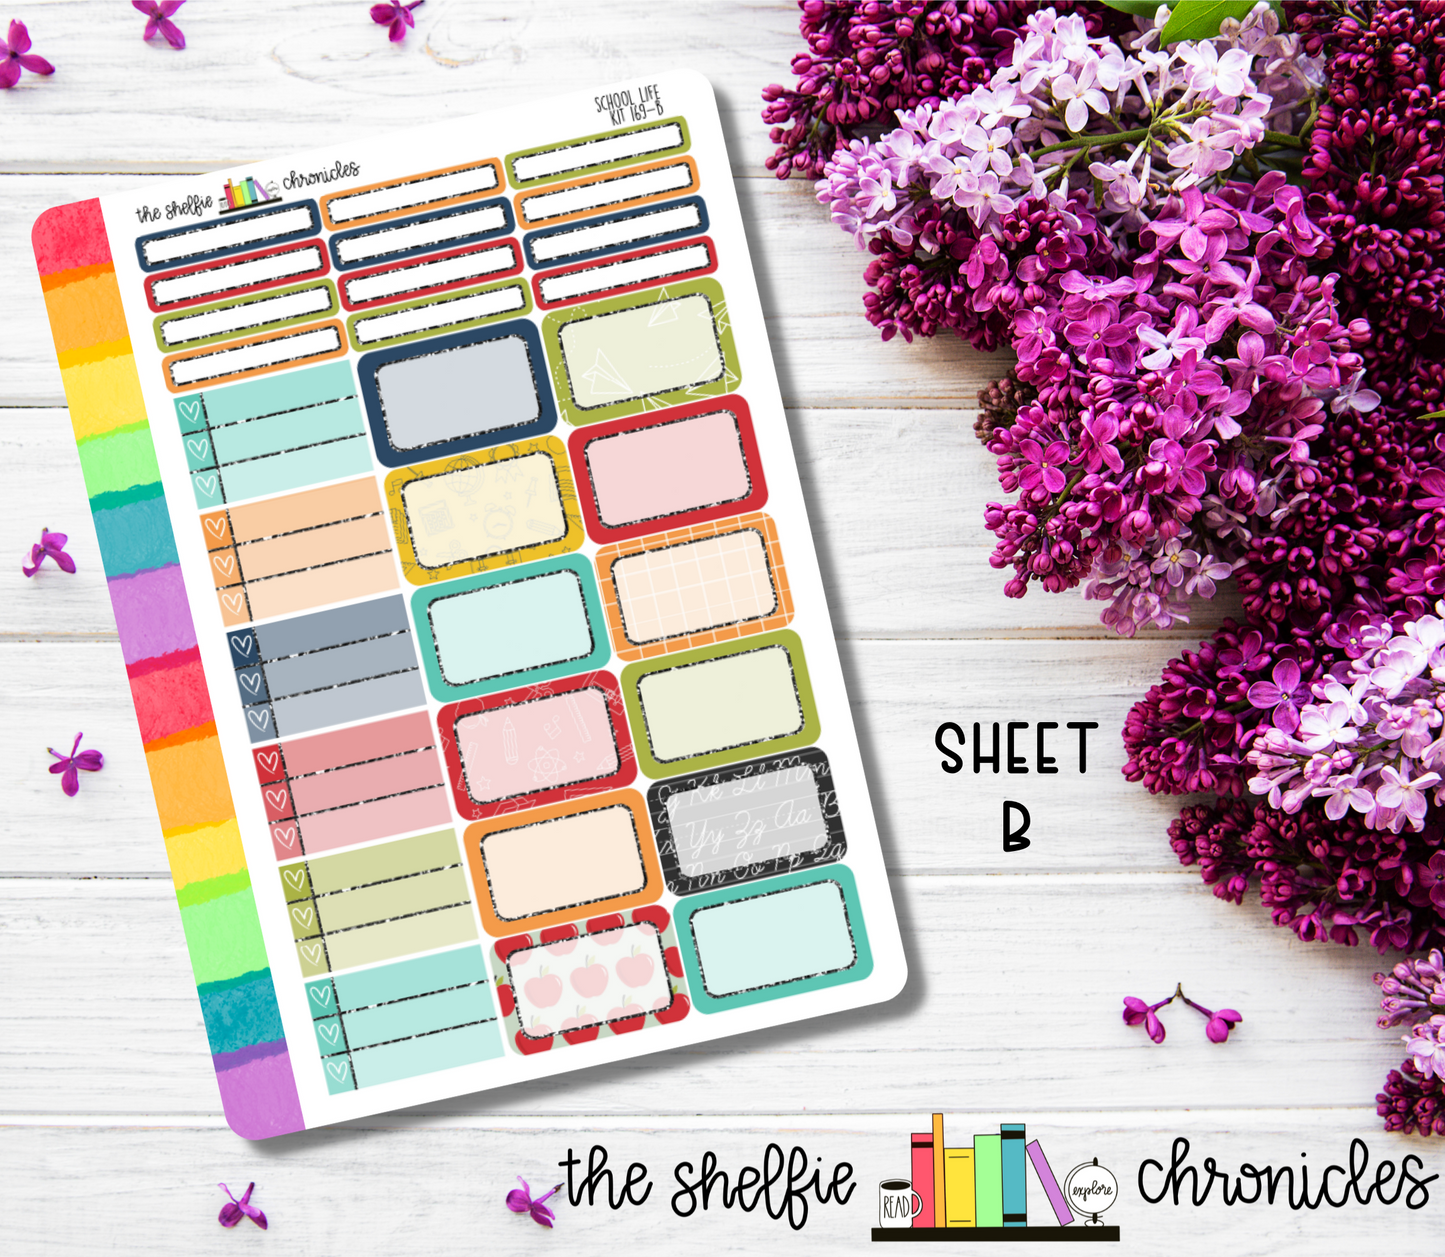 Kit 169 - School Life Weekly Kit - Die Cut Stickers - Repositionable Paper - Made To Fit 7x9 Planners